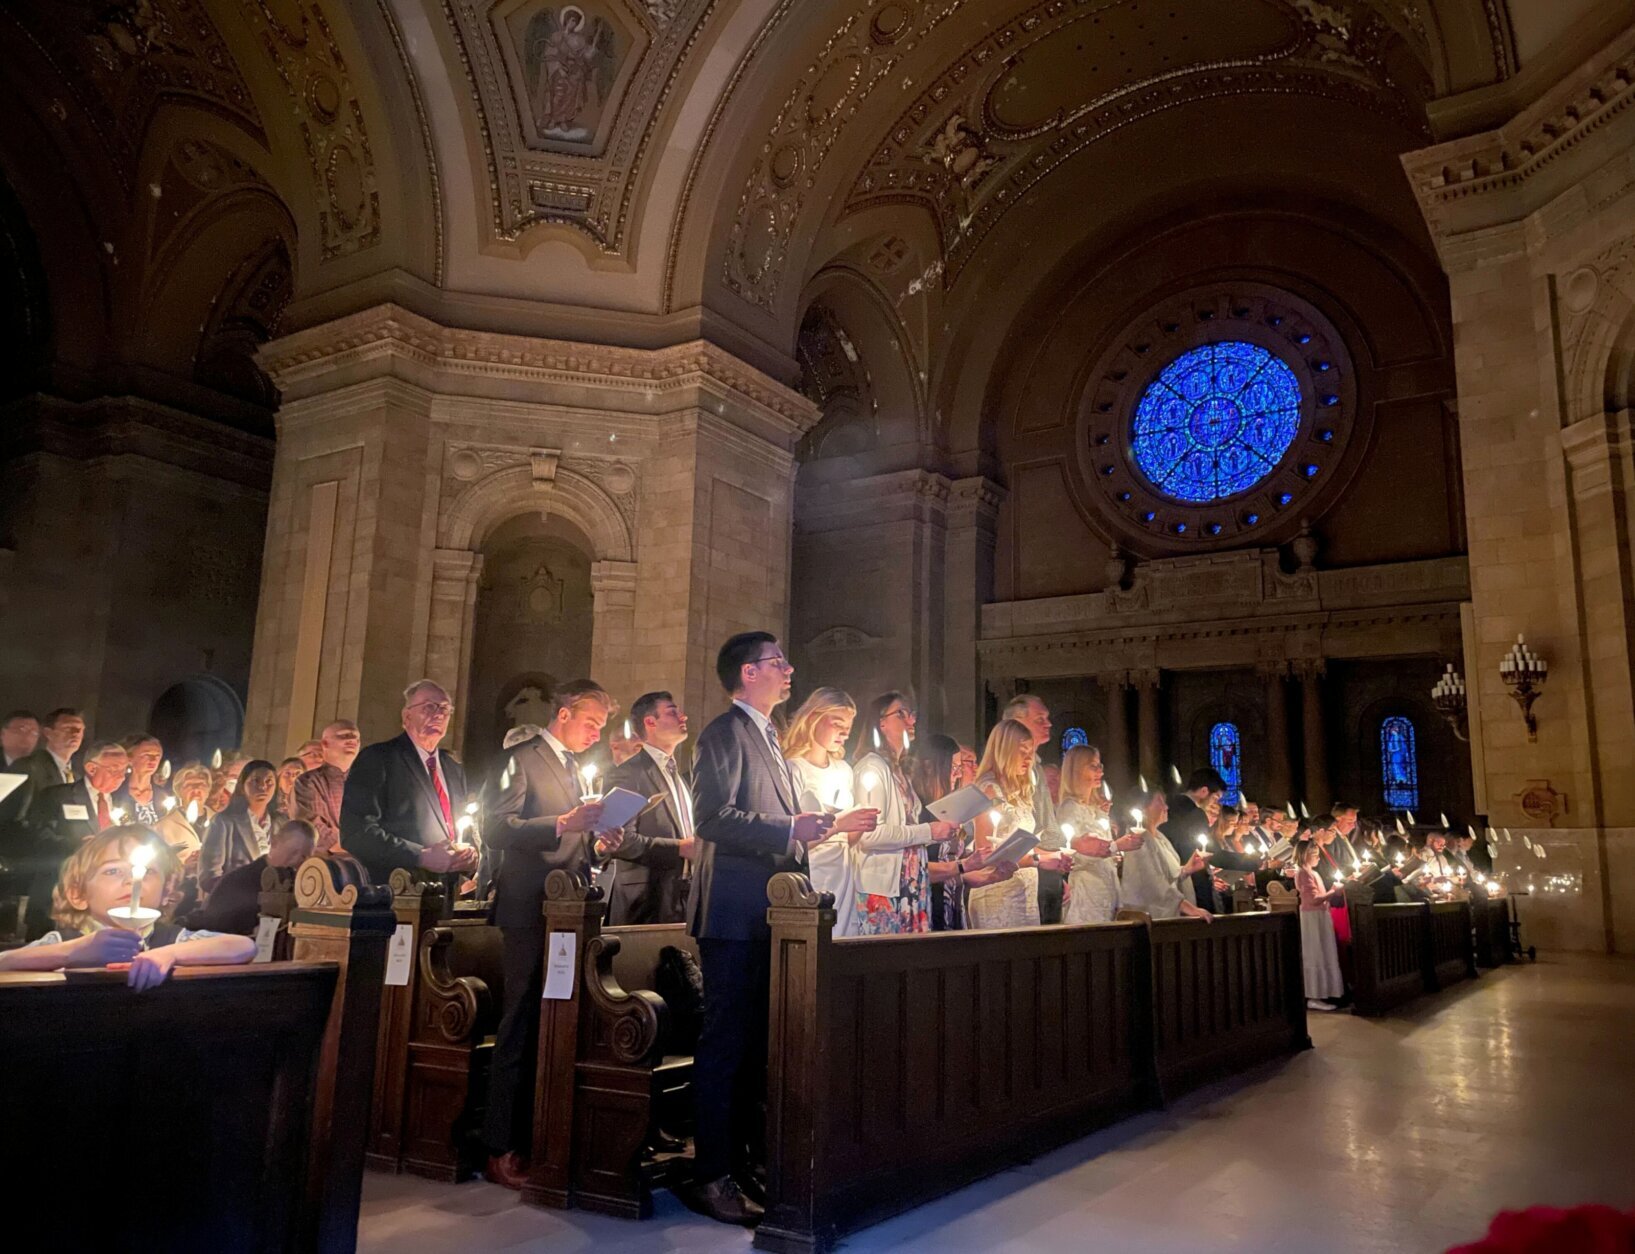 Hundreds of people light candles at the beginning of the Easter Vigil Mass at the Cathedral of St. Paul in St. Paul, Minn., on Saturday, April 16, 2022. For many U.S. Christians, this weekend marks the first time since 2019 that they will gather in person on Easter Sunday, a welcome chance to celebrate one of the year's holiest days side by side with fellow congregants.  (AP Photo/Giovanna Dell'Orto)